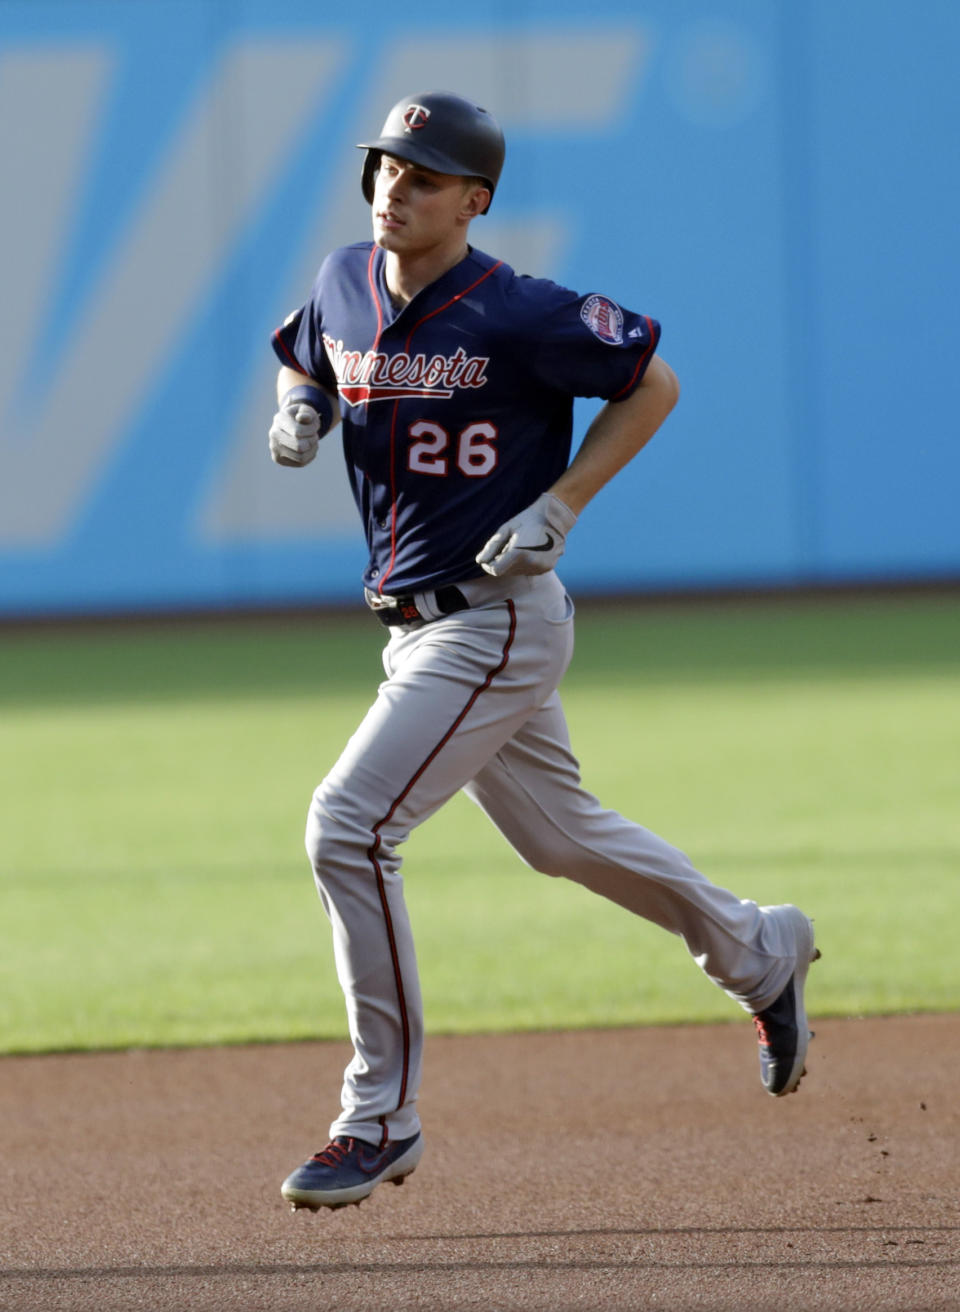 Minnesota Twins' Max Kepler runs the bases after hitting a solo home run off Cleveland Indians starting pitcher Trevor Bauer during the first inning of a baseball game Thursday, June 6, 2019, in Cleveland. (AP Photo/Tony Dejak)